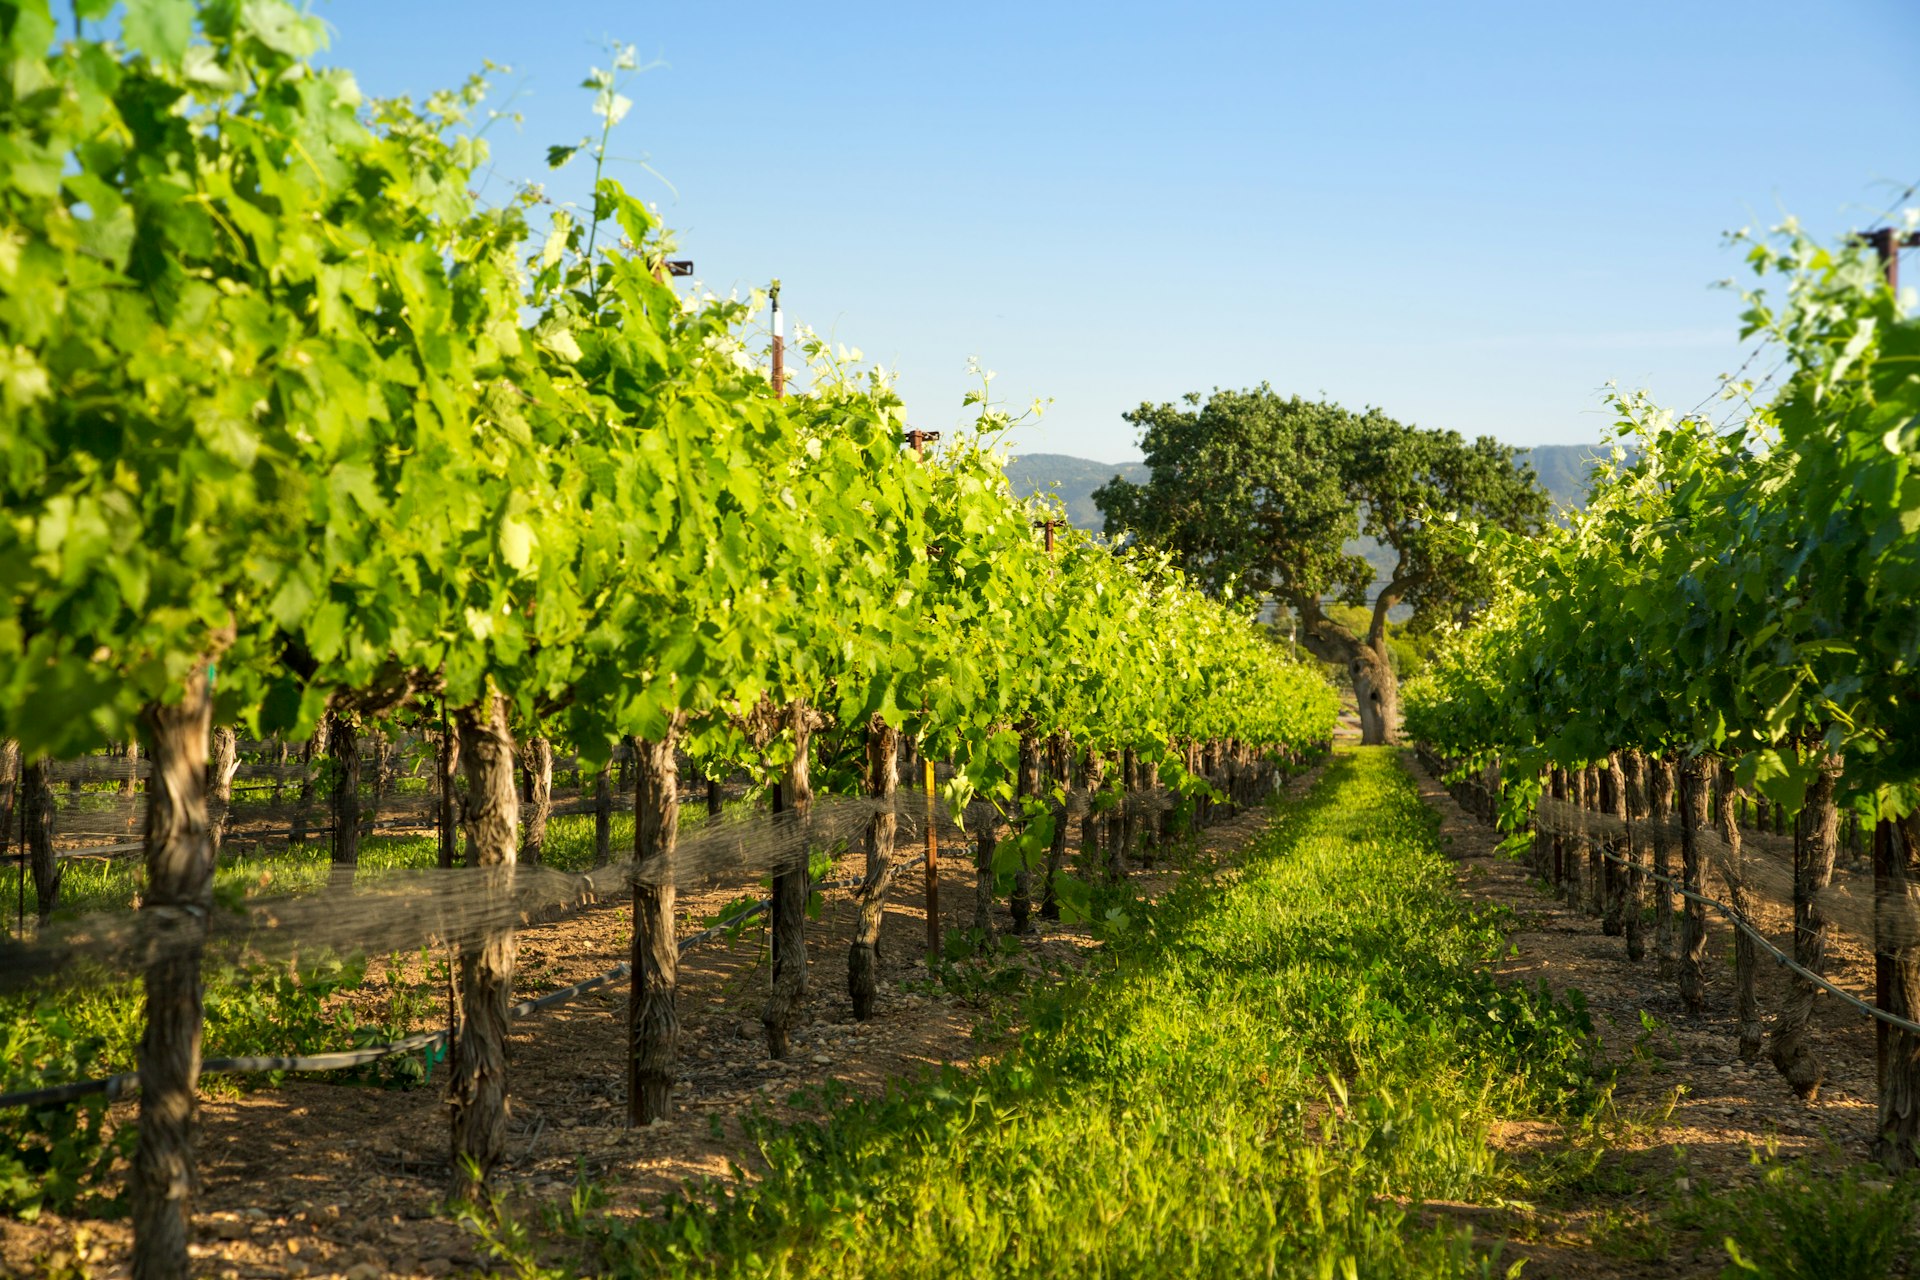 Rows of lush green vineyard grapvines with a majestic oak tree in the distance.